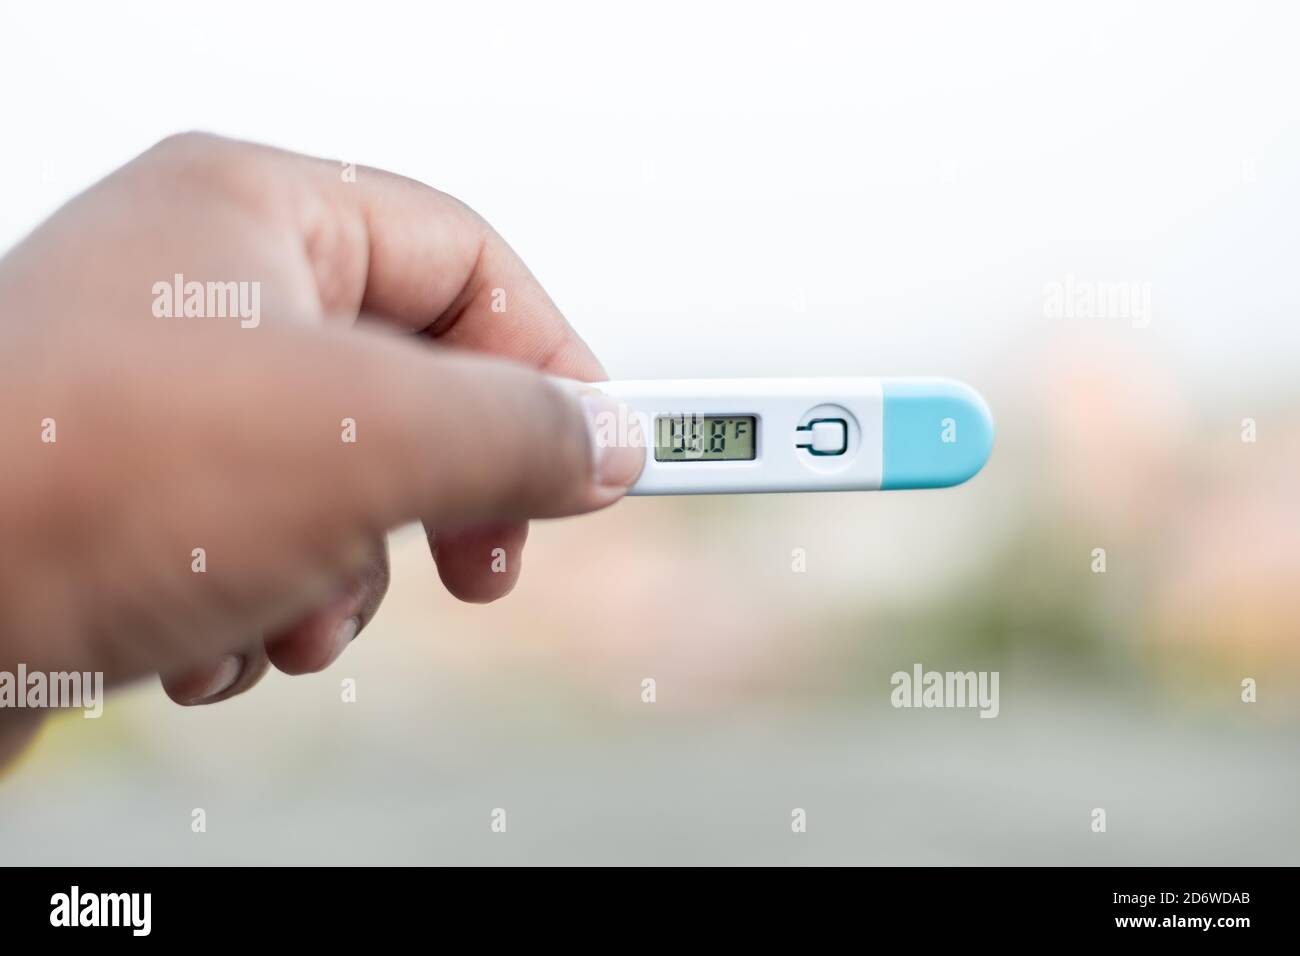 Sick man holds digital thermometer with body temperature reading in Fahrenheit up close to the camera. Stock Photo